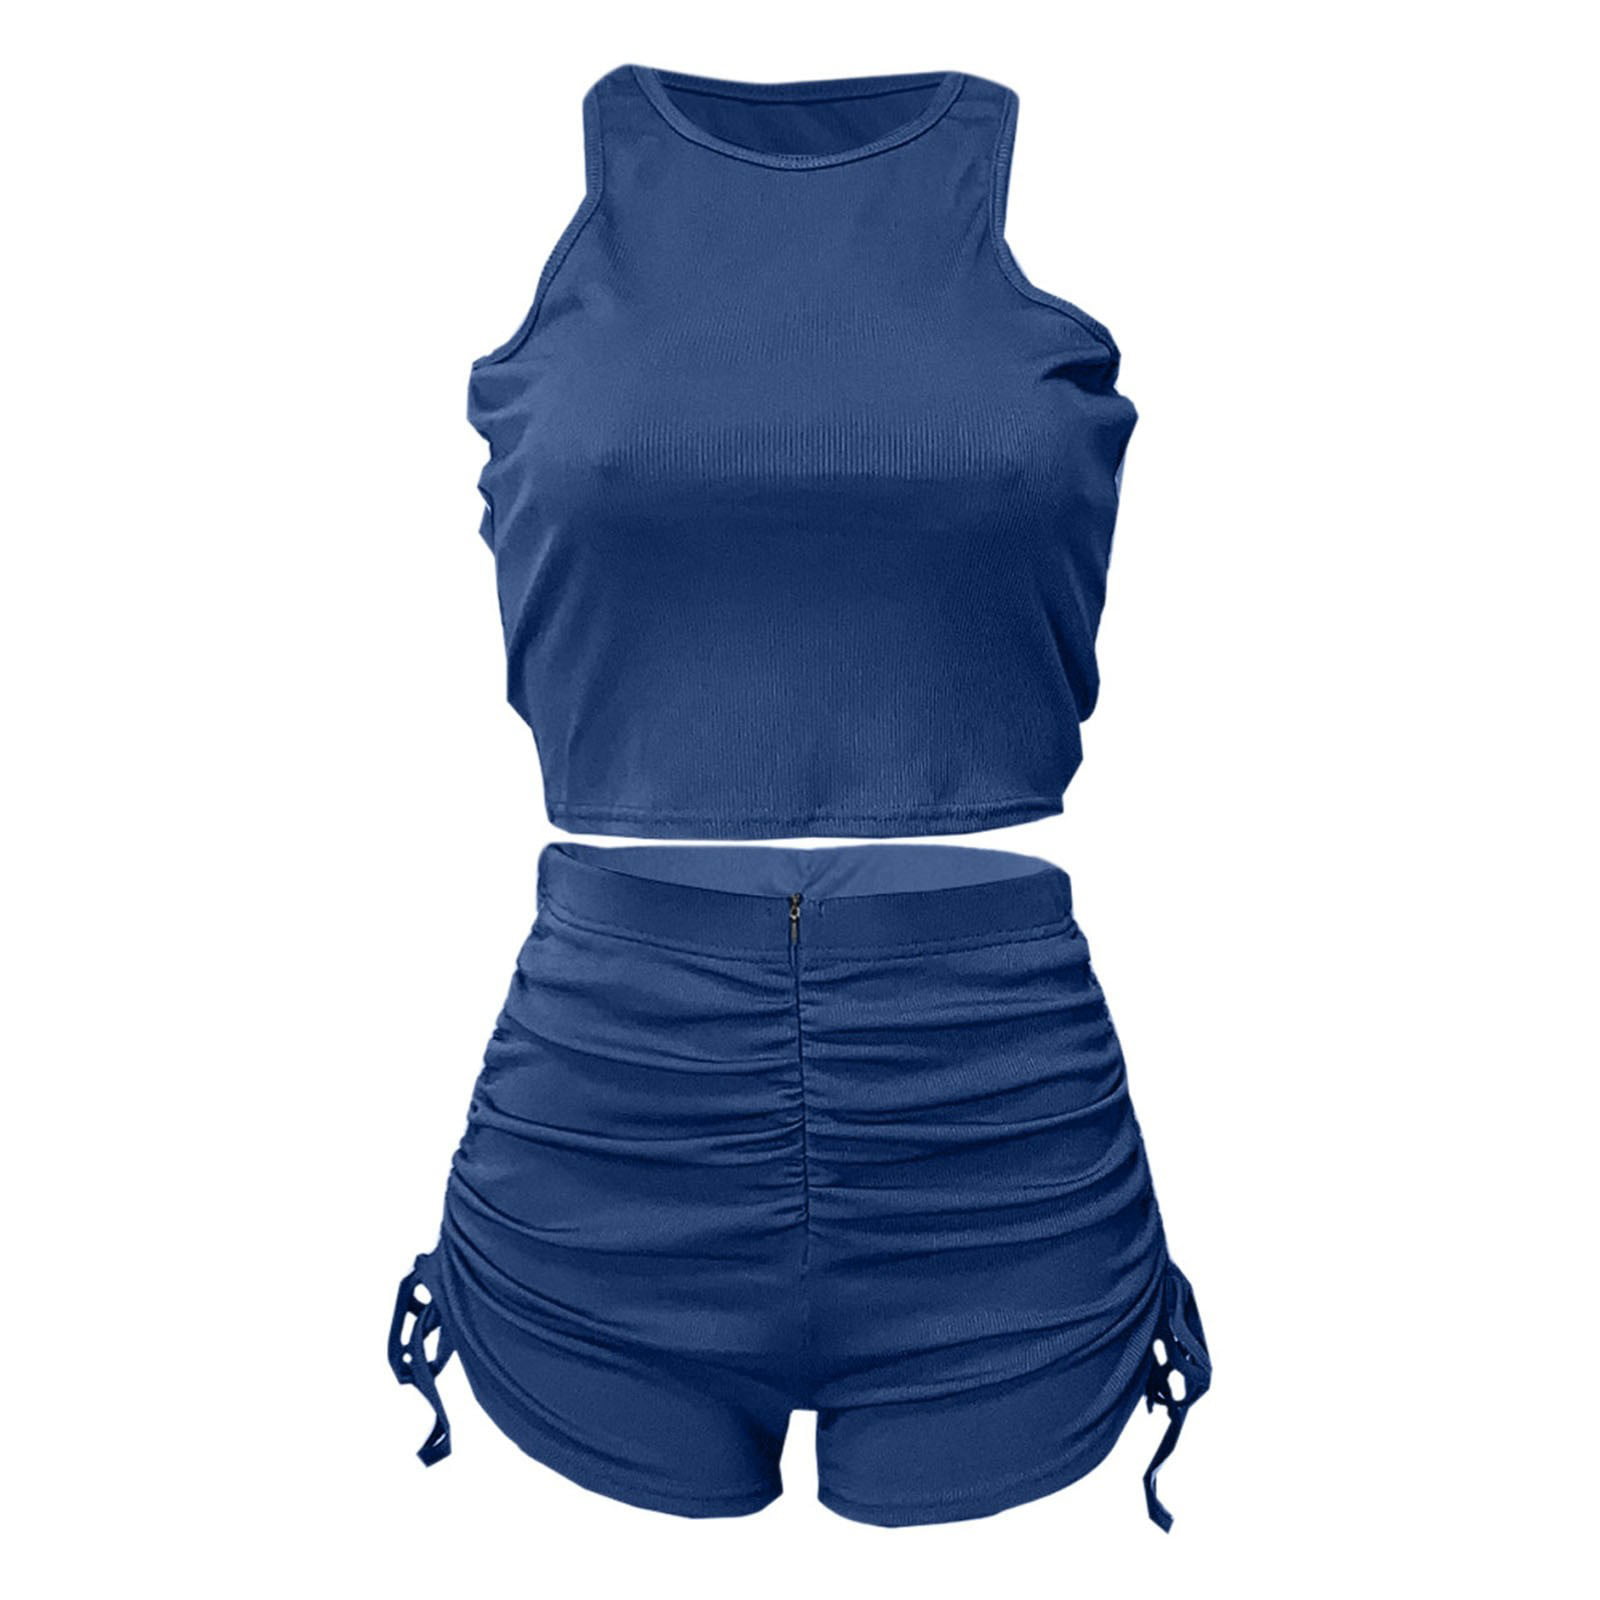 Reflective Drawstring Crop Top And Shorts Suit Women Set For Women Perfect  For Jogging And Fashionable Outfits From Zjxrm, $31.58